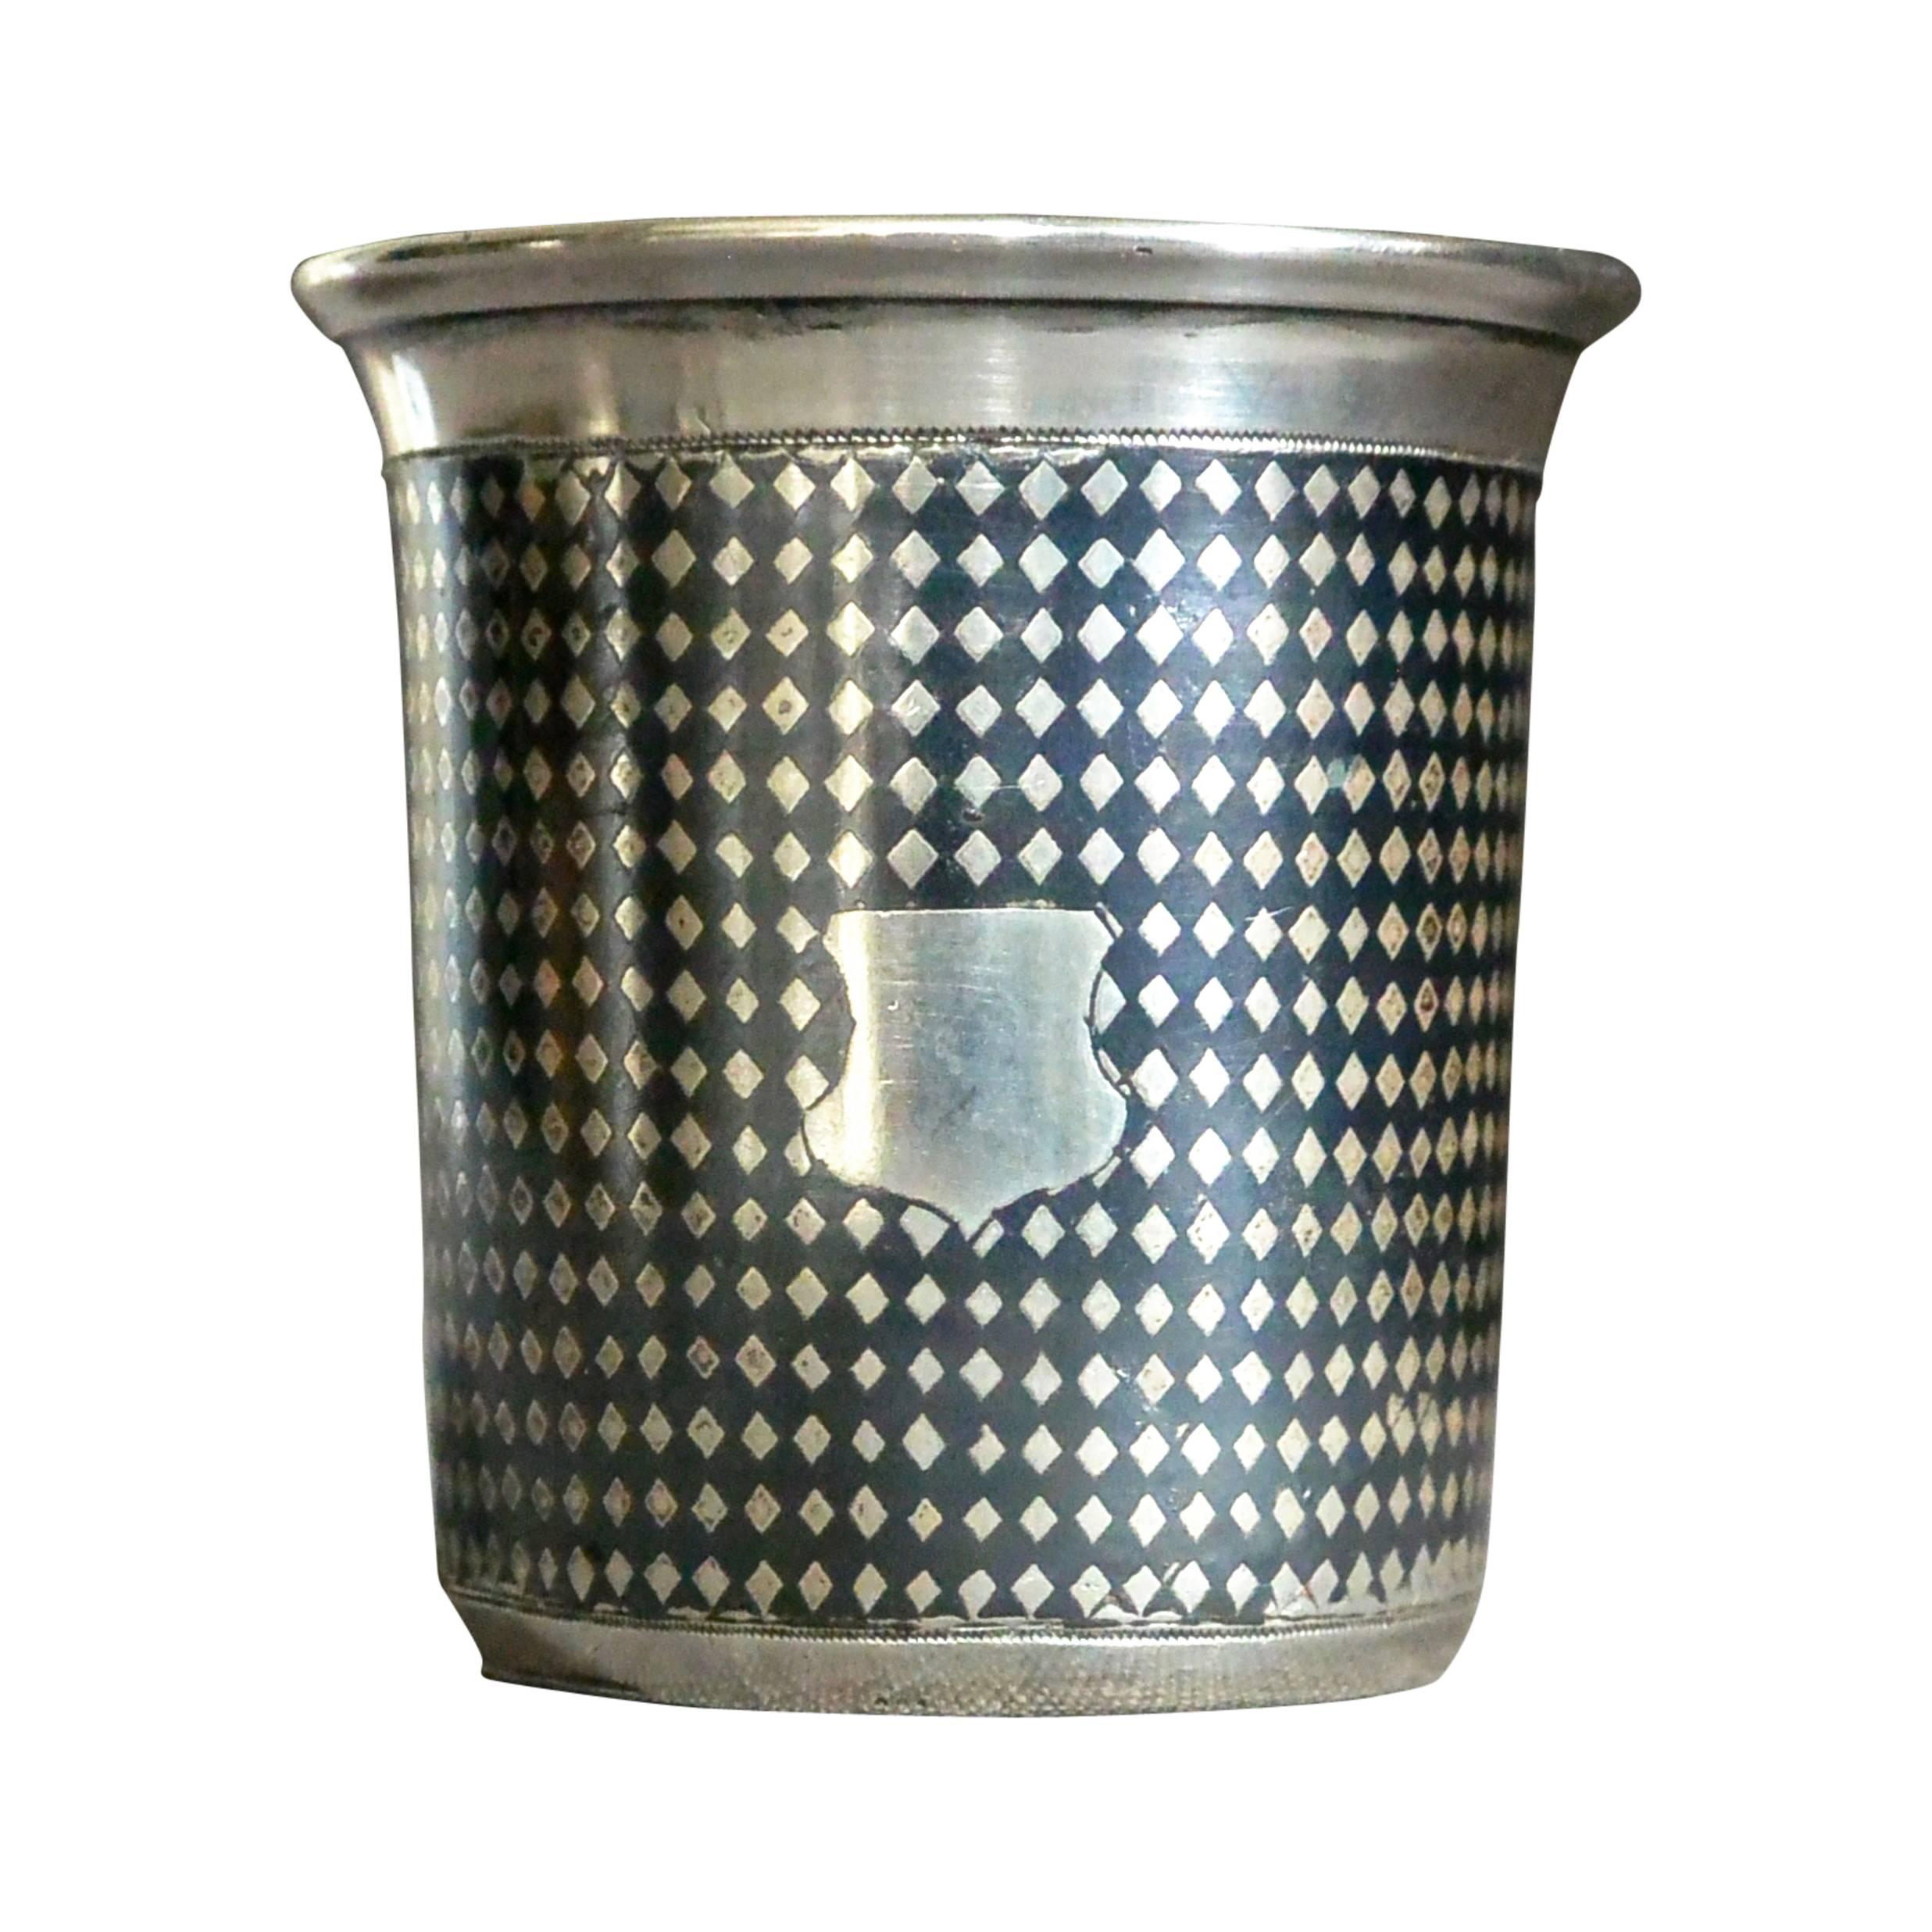 Russian silver and niello beaker. Heavy sterling silver presentation cup with niello diamond pattern and blank cartouches. With hallmarks and stamped TA and KA 1859 and 84. Russia, circa 1859
Dimension: 2.5